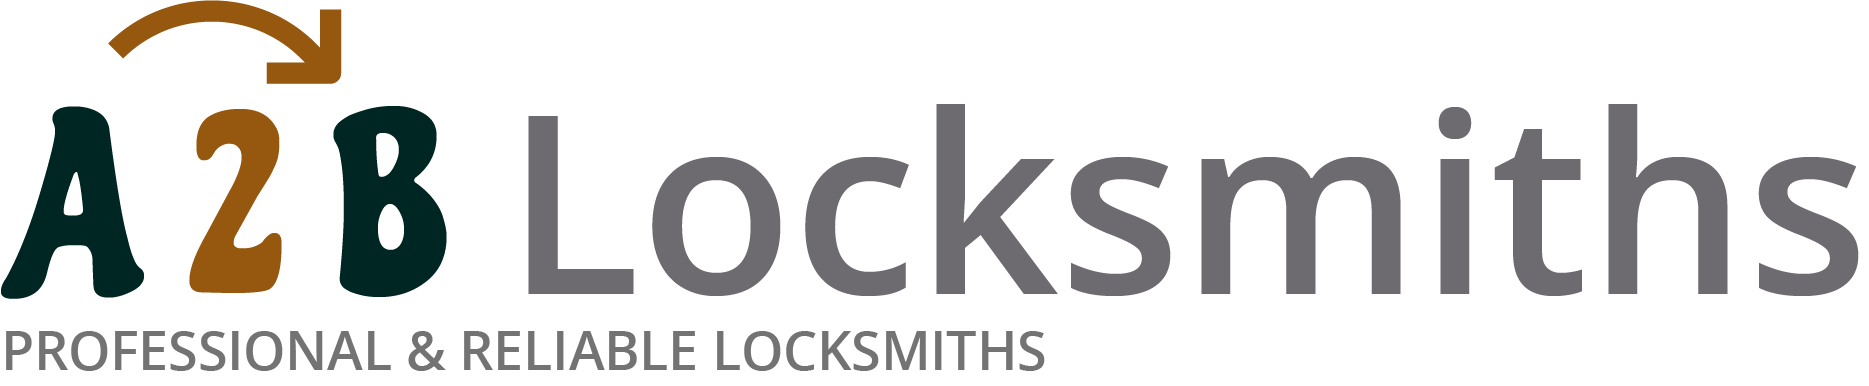 If you are locked out of house in Rotherhithe, our 24/7 local emergency locksmith services can help you.